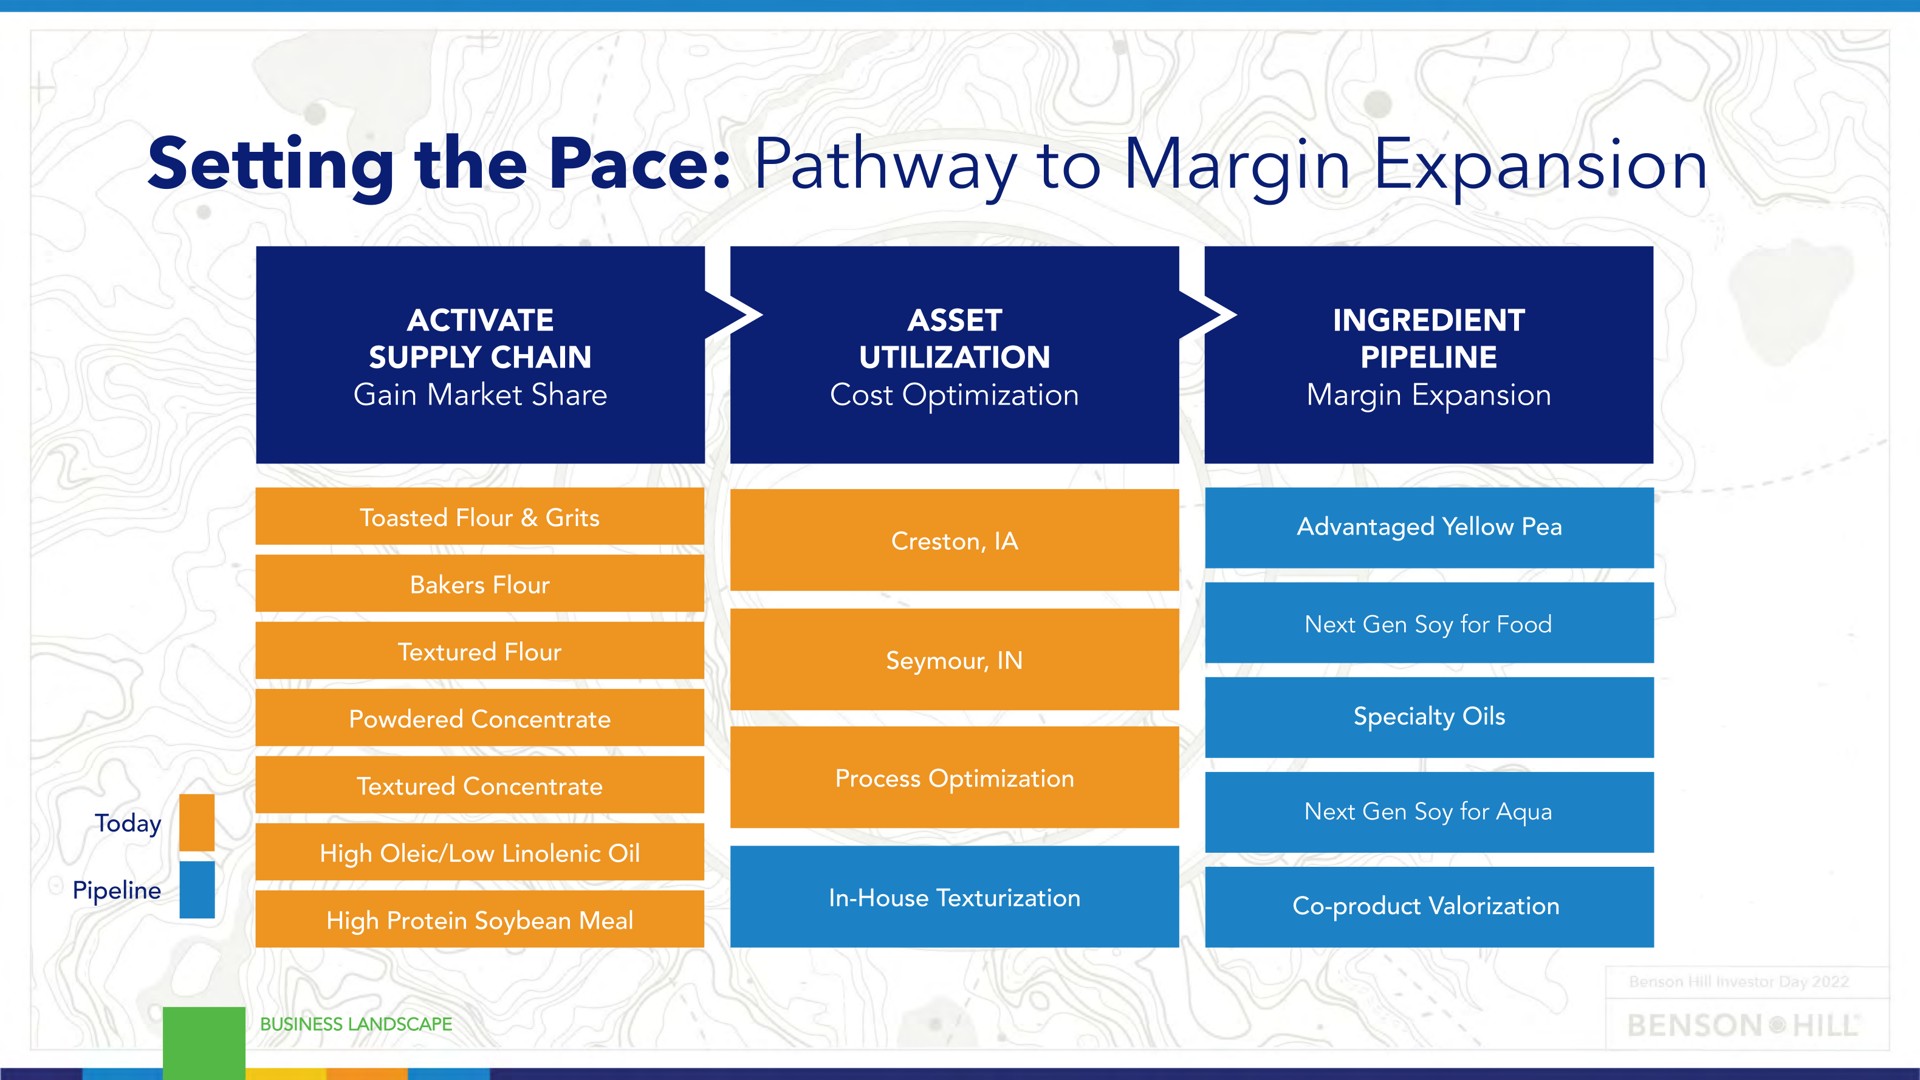 setting the pace pathway to margin expansion on | Benson Hill